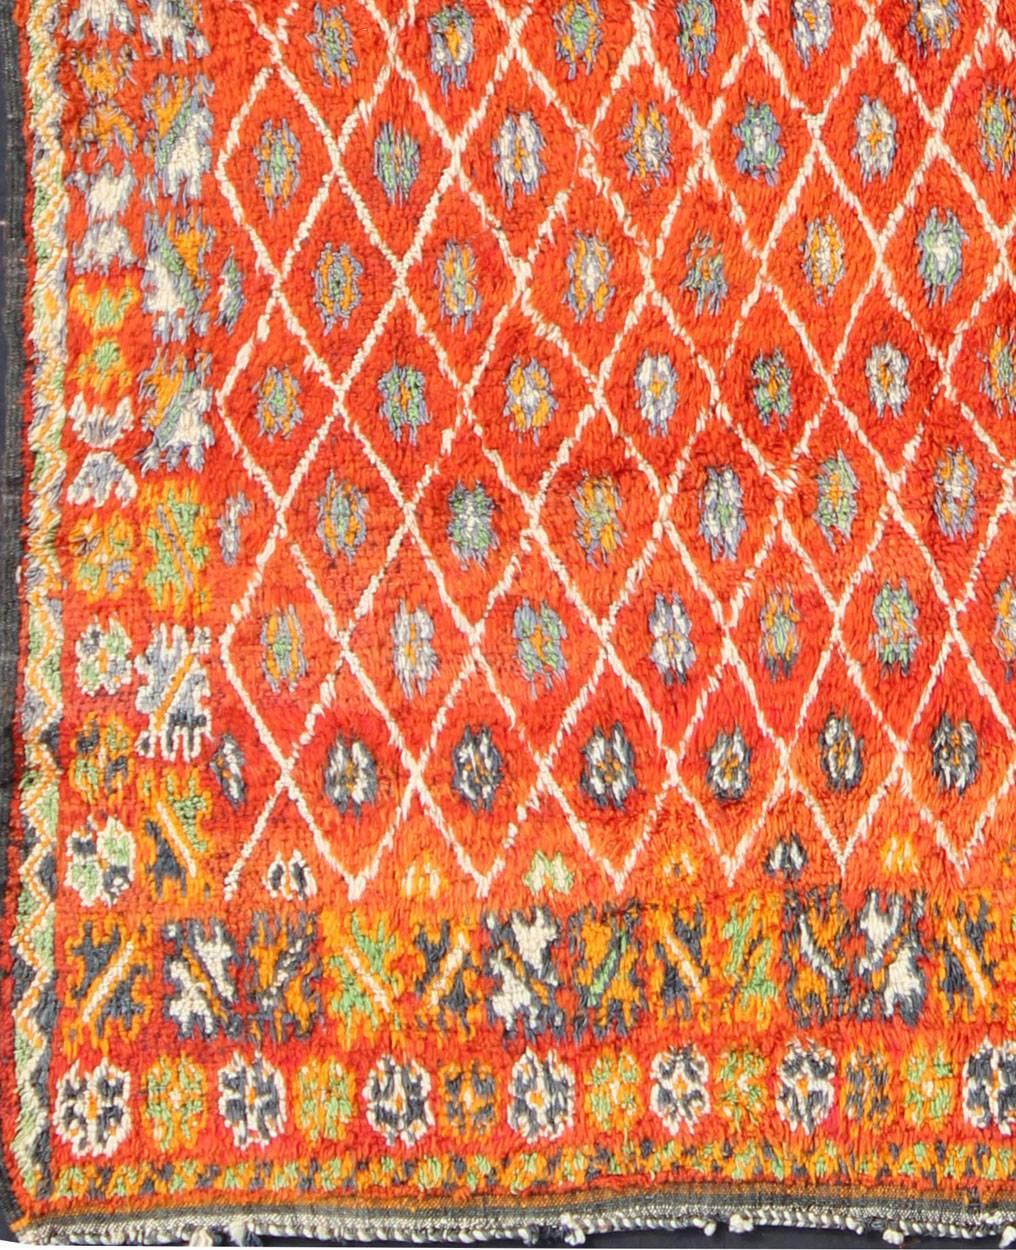 Measures: 6'9'' x 9'0''.
This Moroccan rug has an all-over diamond geometric pattern with ivory outlines, set on a field shaded with orange and red. The border features various sub-geometric motifs. Colors include ivory, charcoal, orange, red, gray